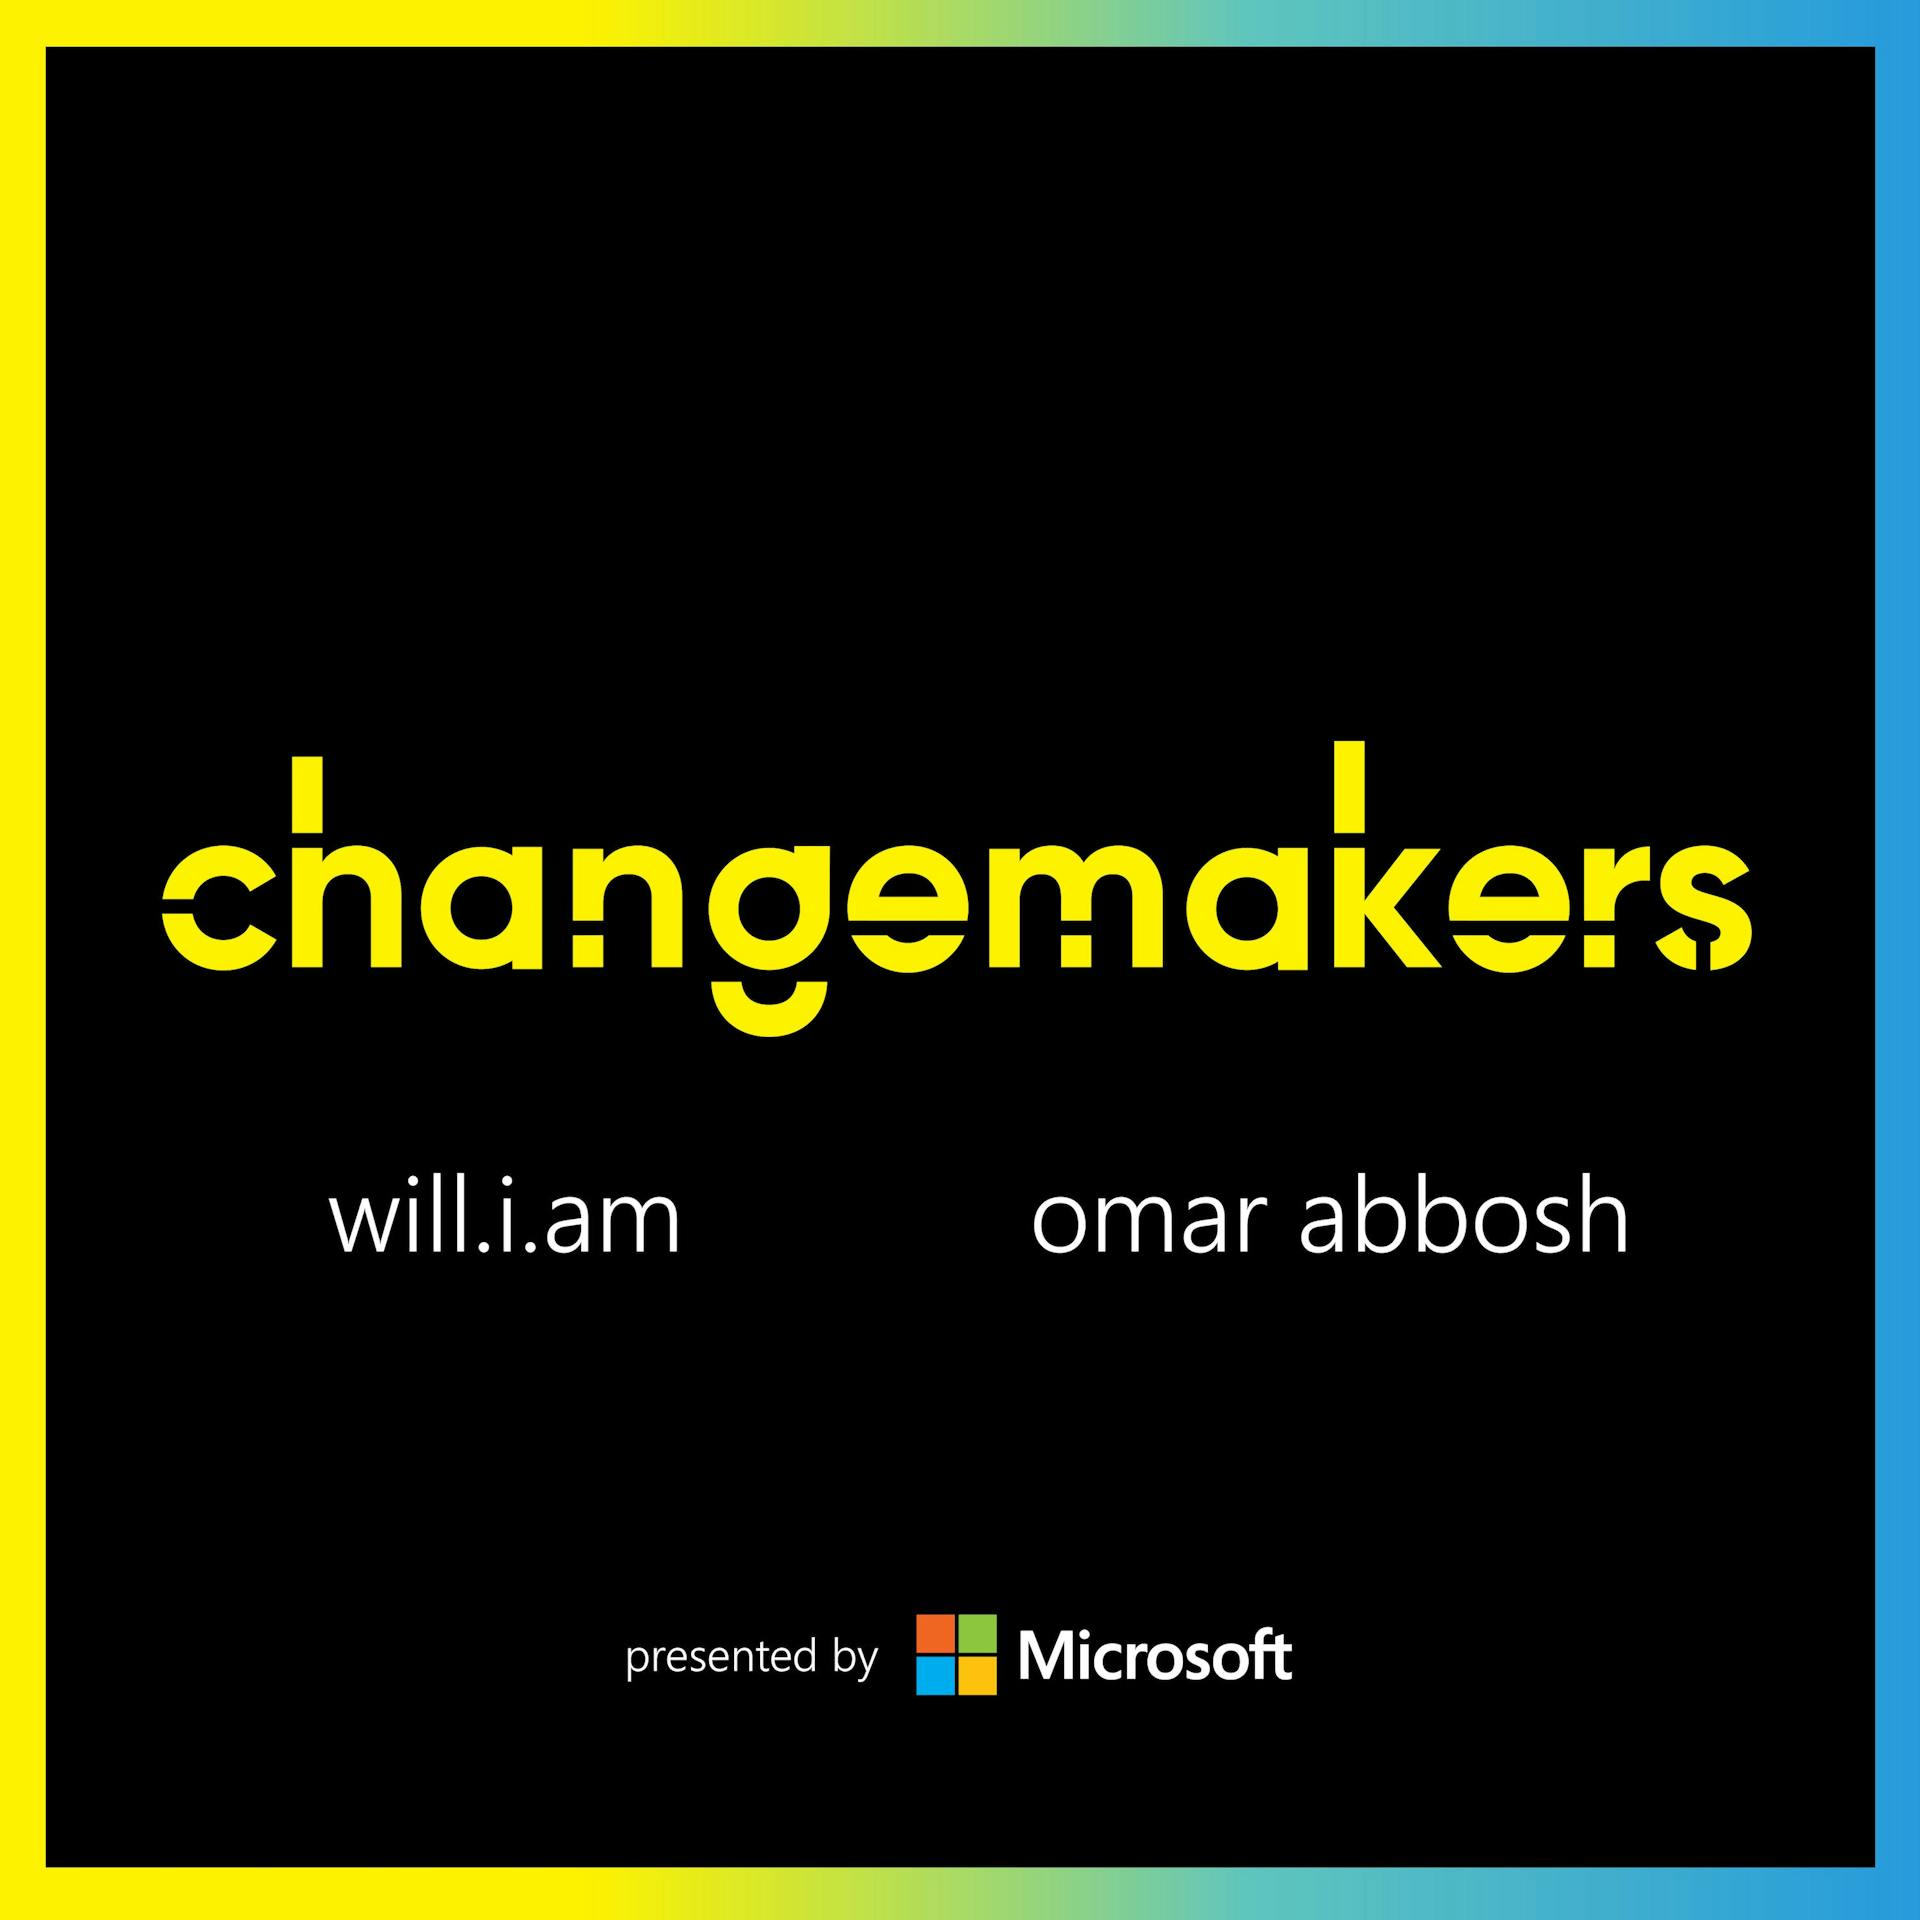 Review: Changemakers from Microsoft